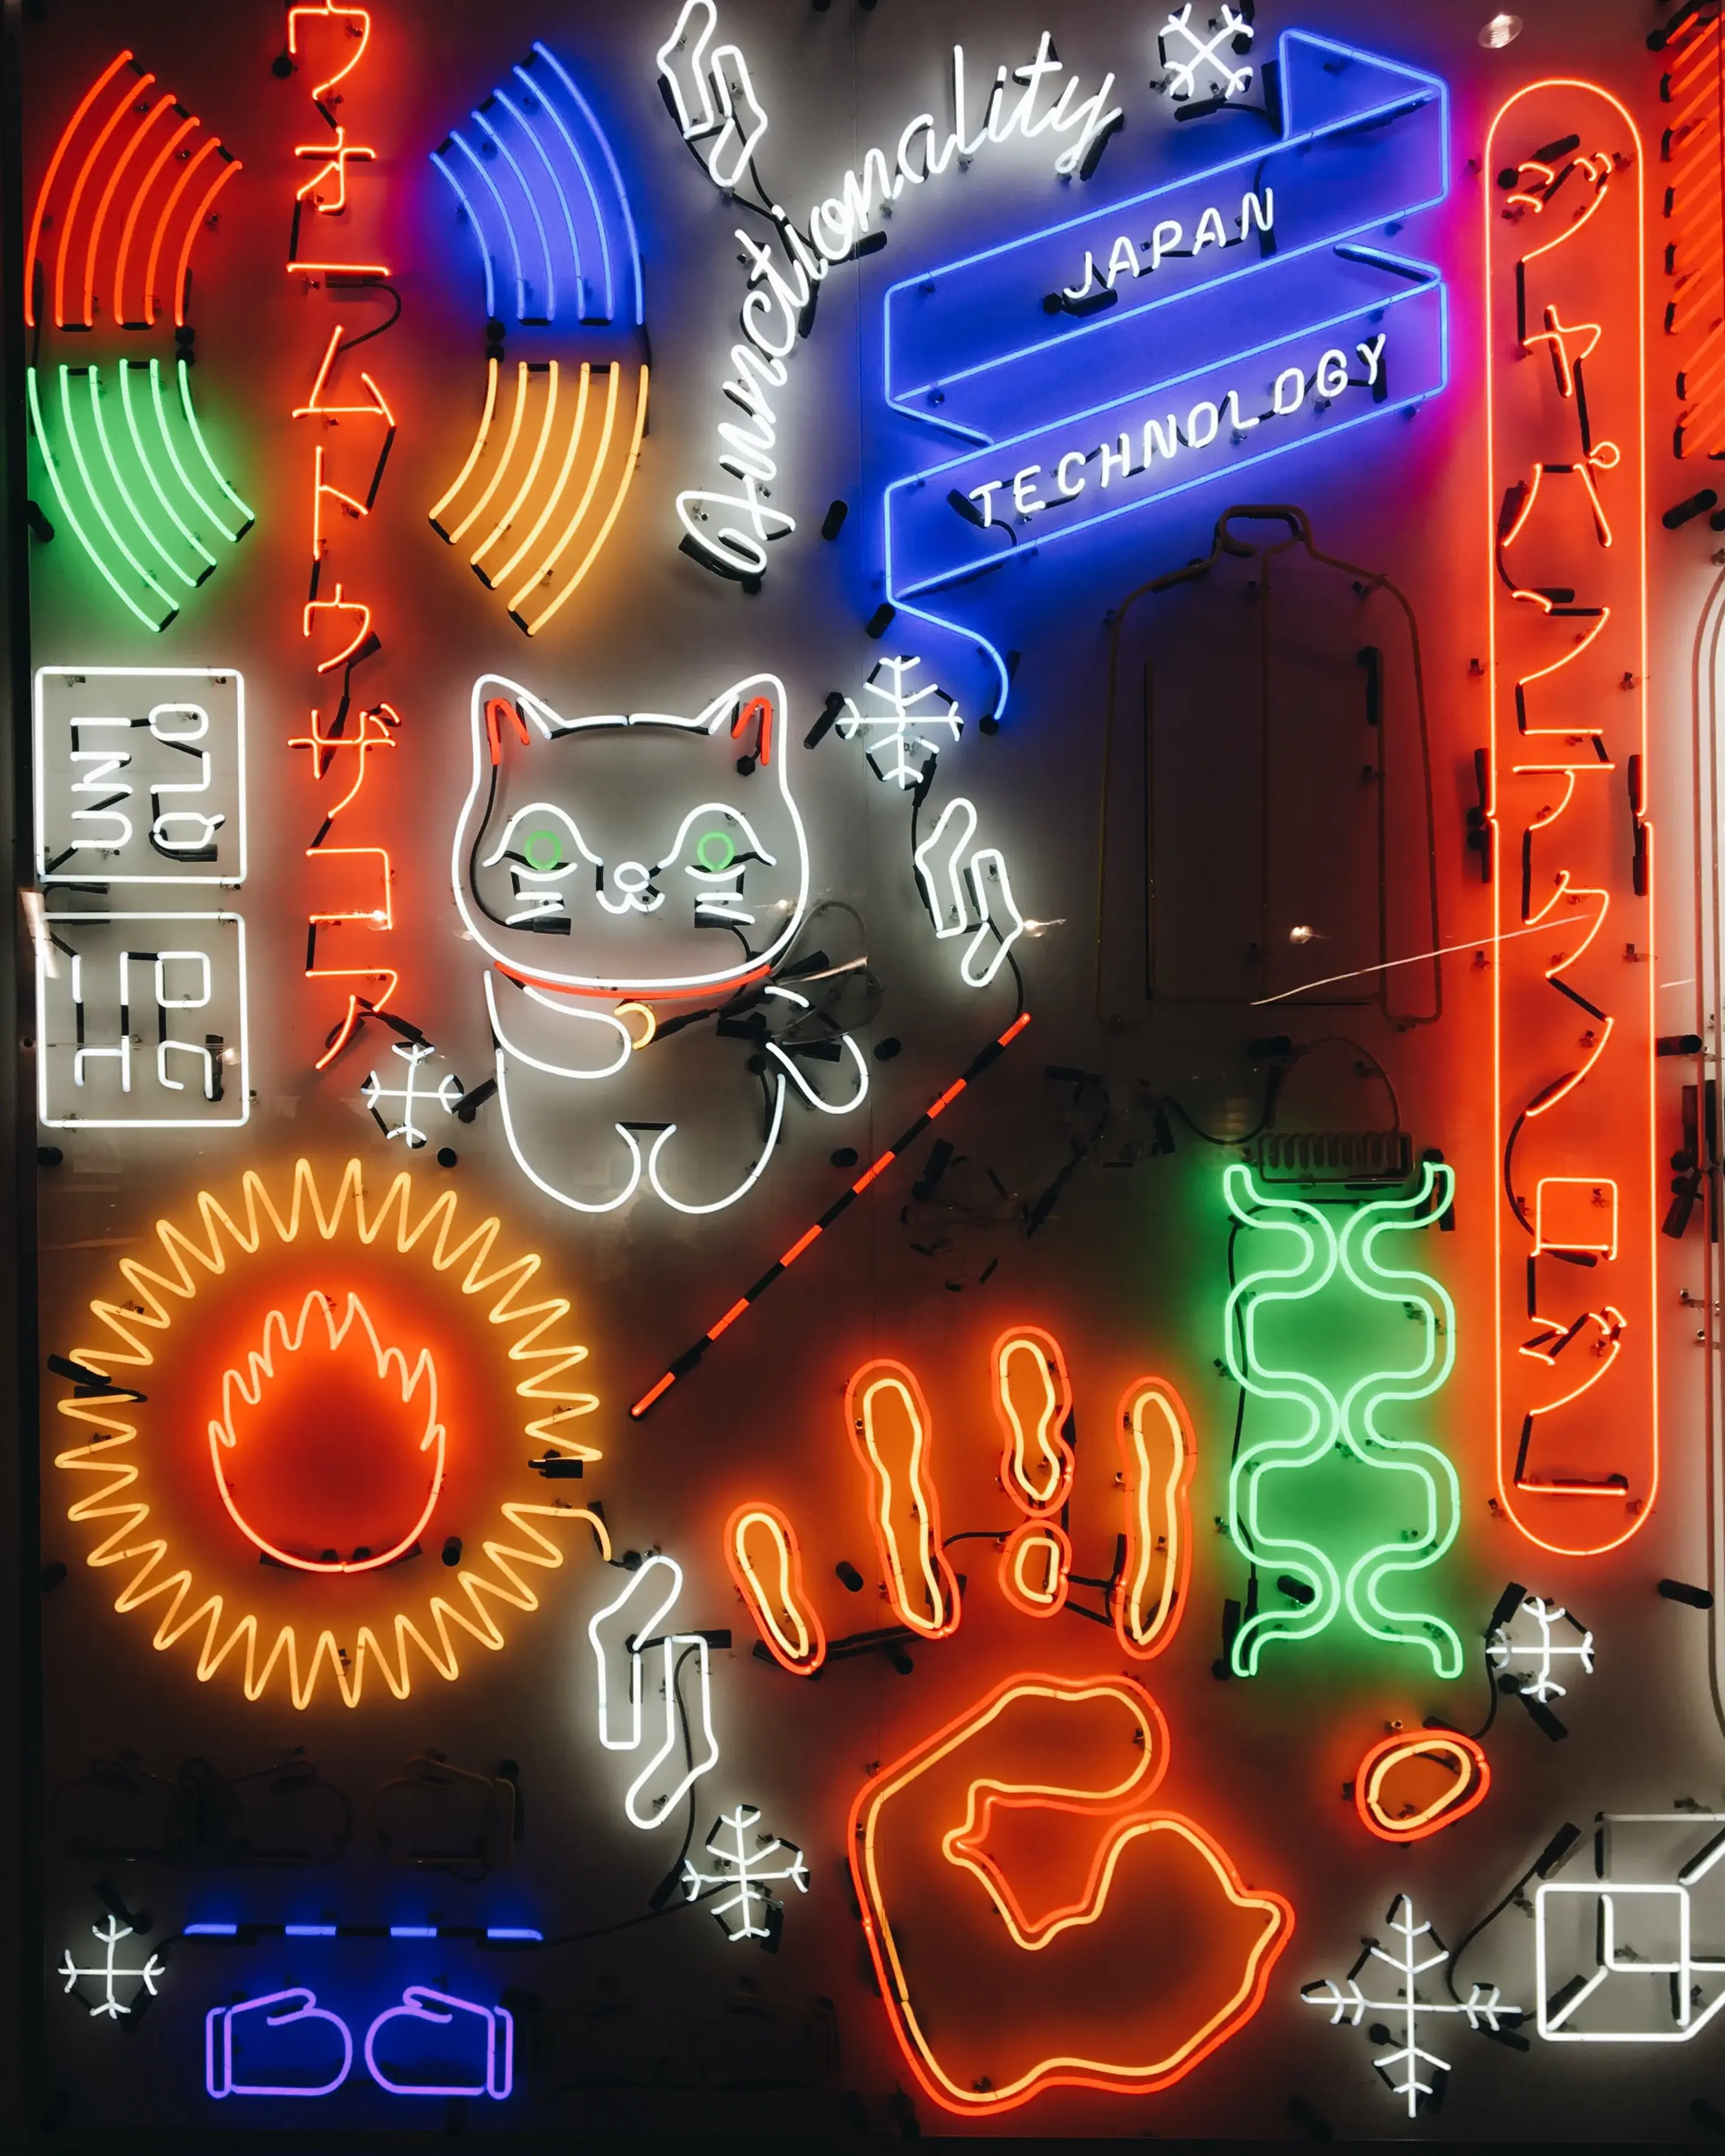 A variety of neon signs all vying for attention